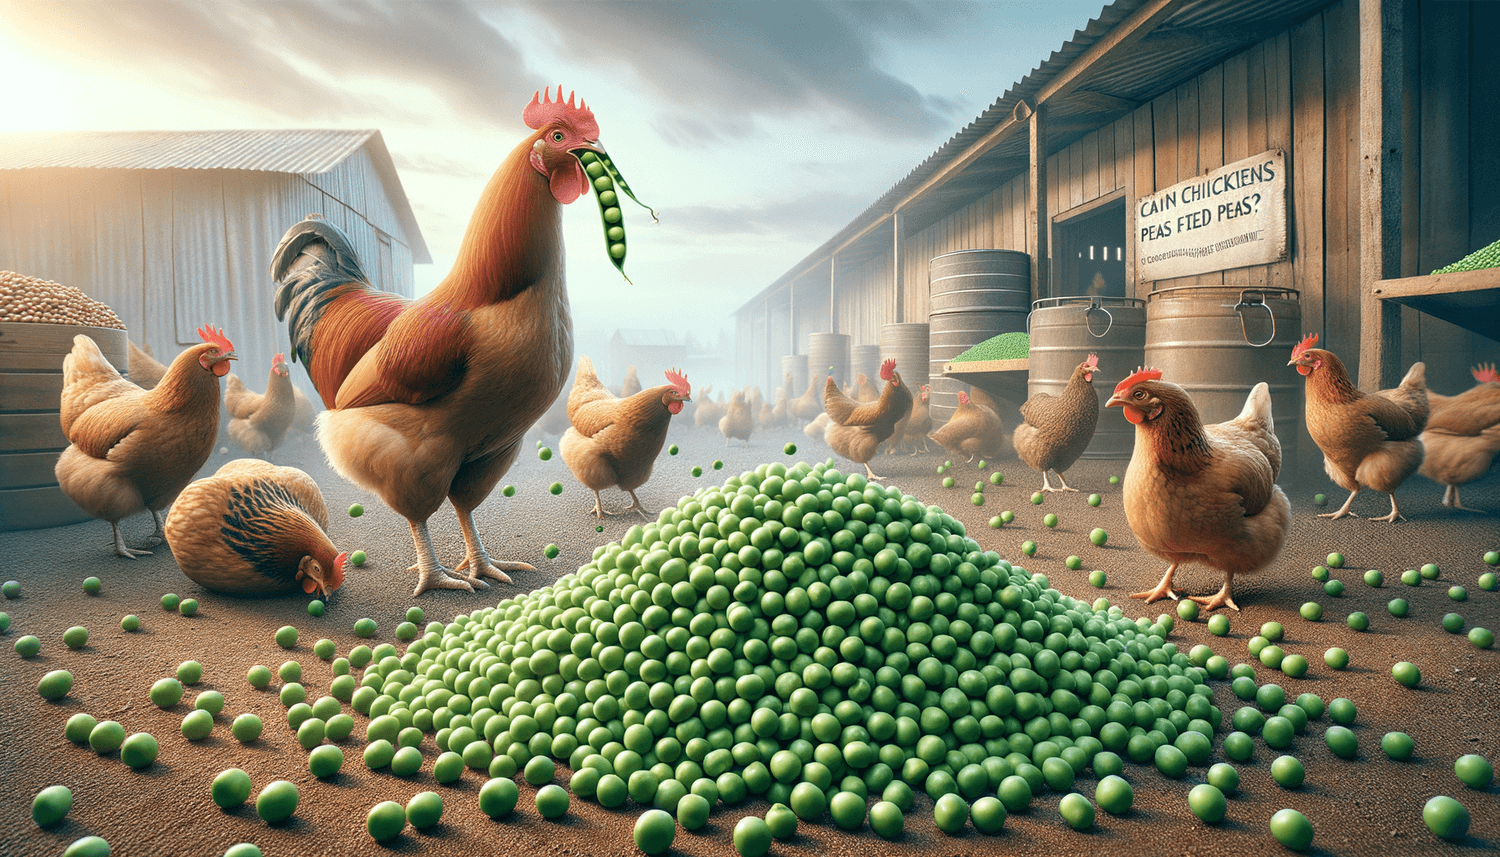 Can Chickens Eat Peas?